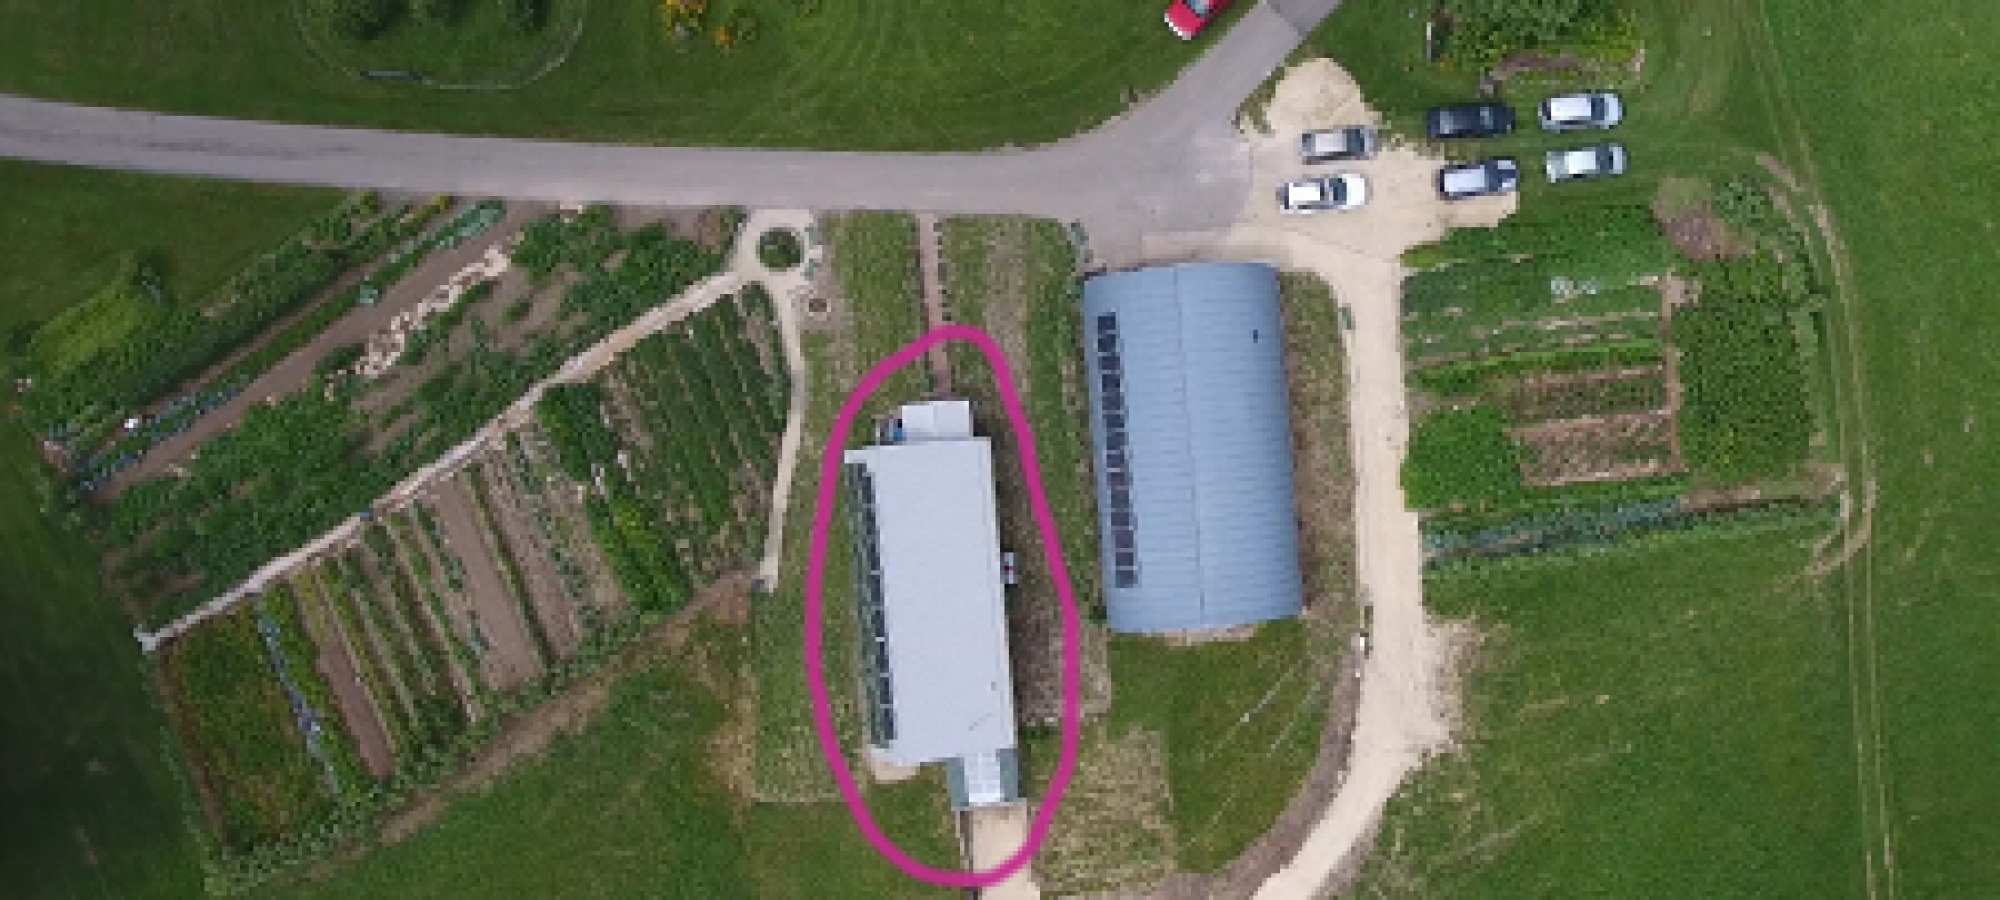 Greenhouse from above